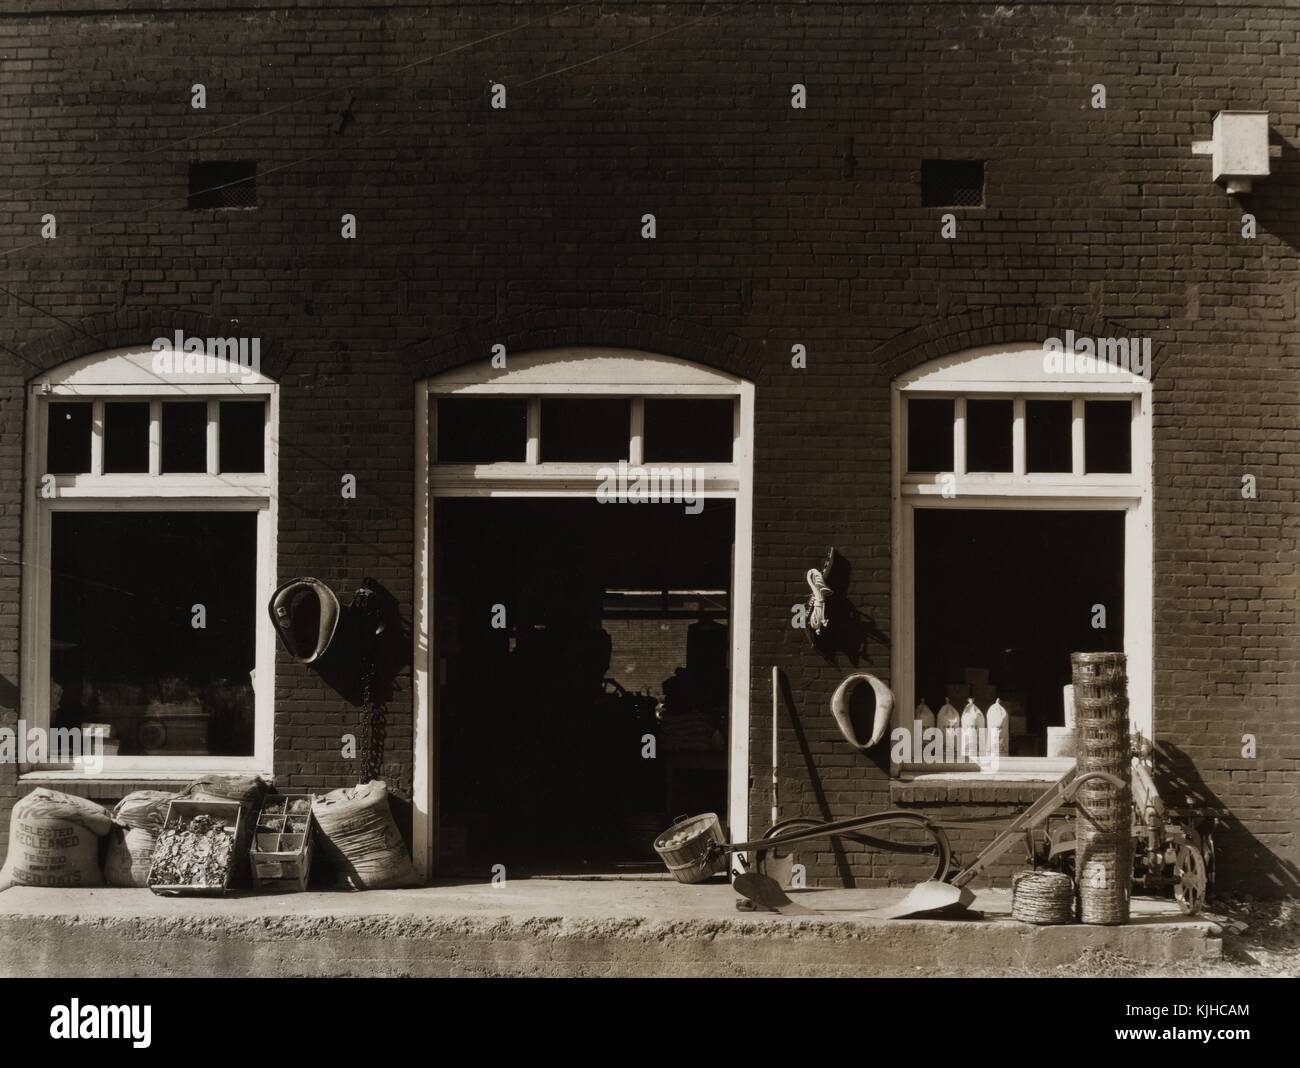 Black and white photograph of the front of a general store, by Walker Evans, American photographer known for his work for the Farm Security Administration documenting the effects of the Great Depression, Mississippi, 1936. From the New York Public Library. Stock Photo